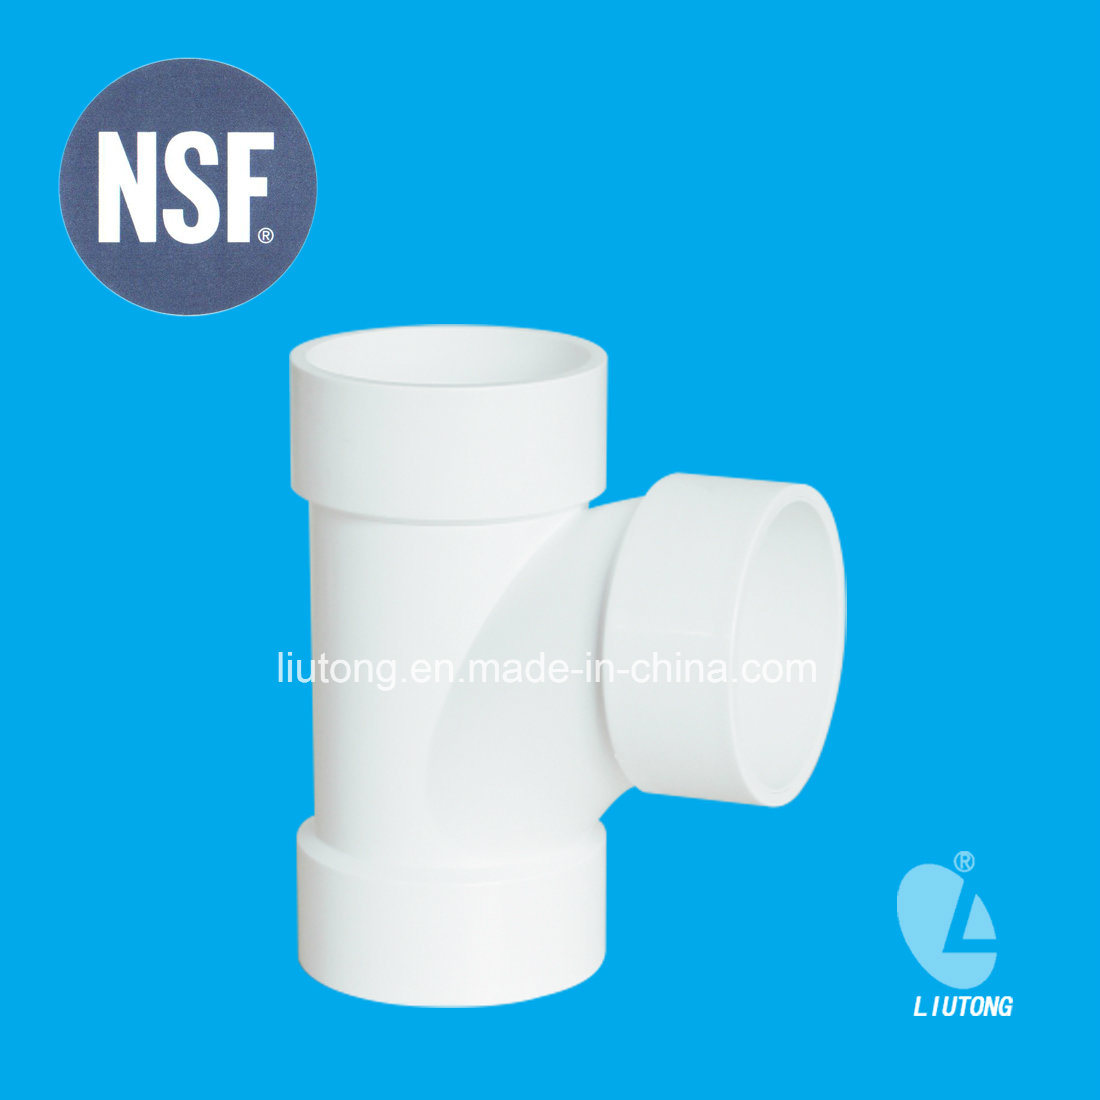 PVC Equal Tee ASTM D2665 Standard for Dwv Drain Water with NSF Certificate